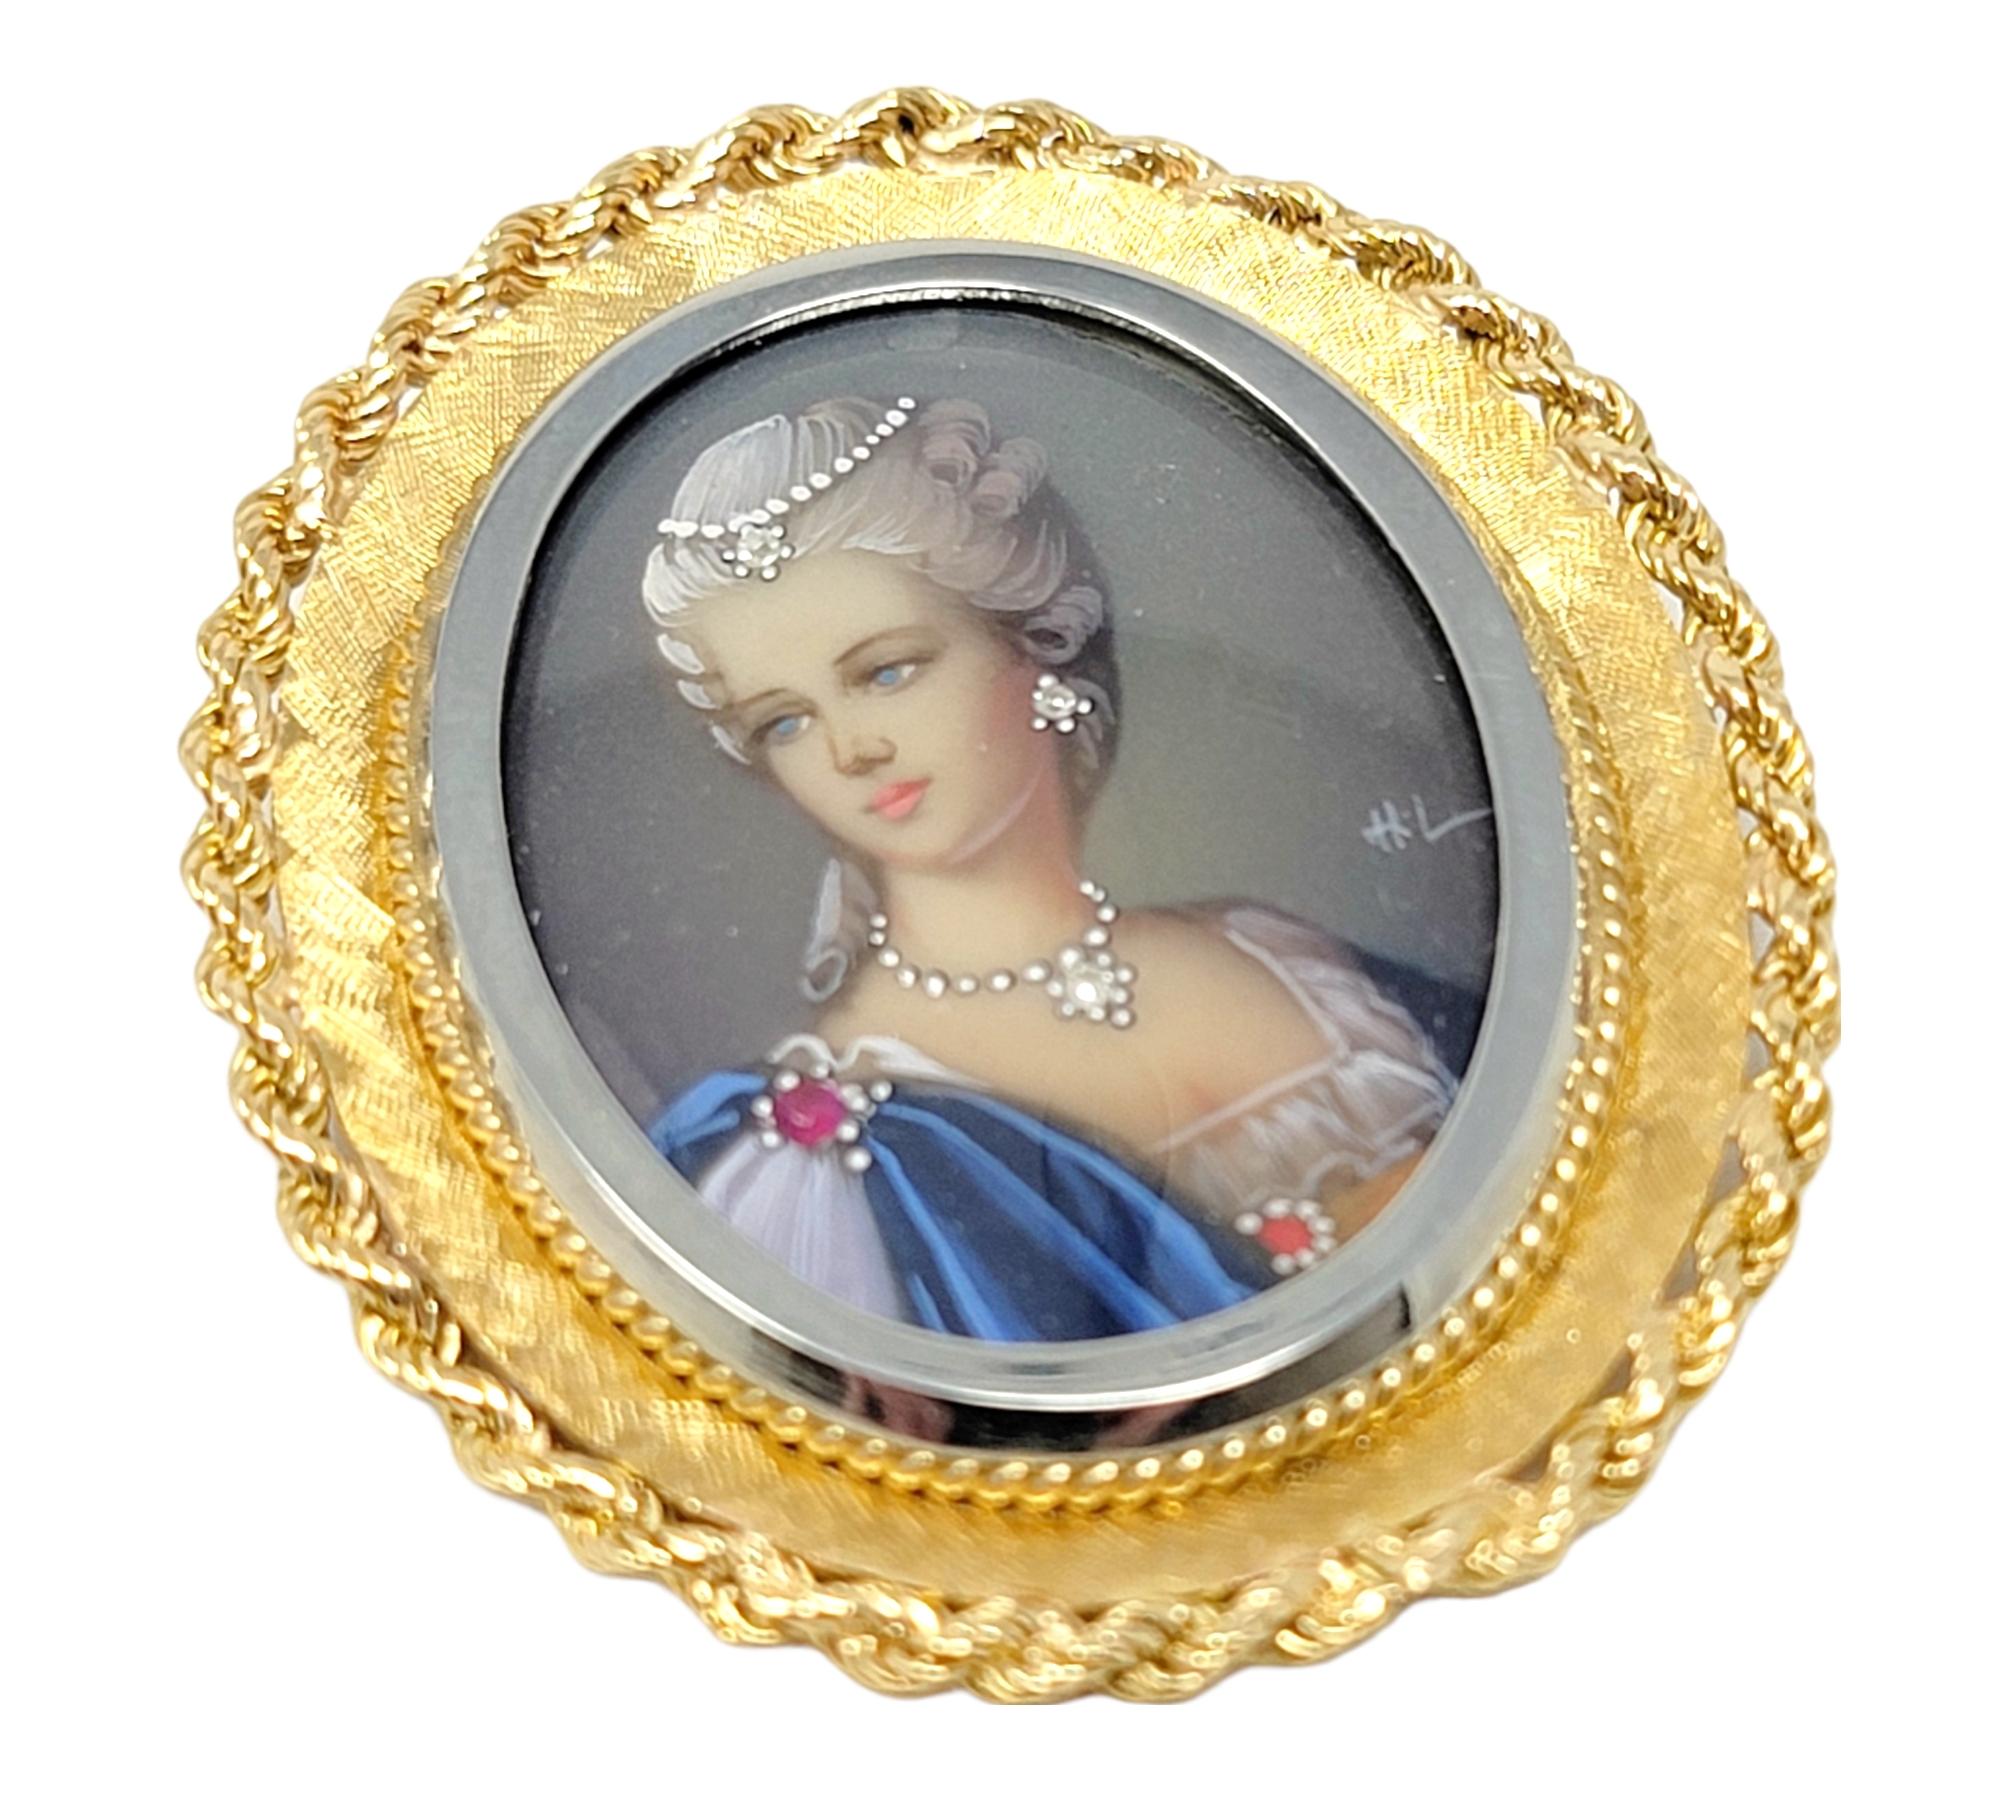 Lovely, one of a kind vintage brooch / pendant with delicate diamond and ruby accents. It features a stunningly detailed portrait of a woman adorned in jewels with a luxurious gold oval frame.  

Metal: 18K Yellow Gold
Weight: 13.48 grams 
Natural